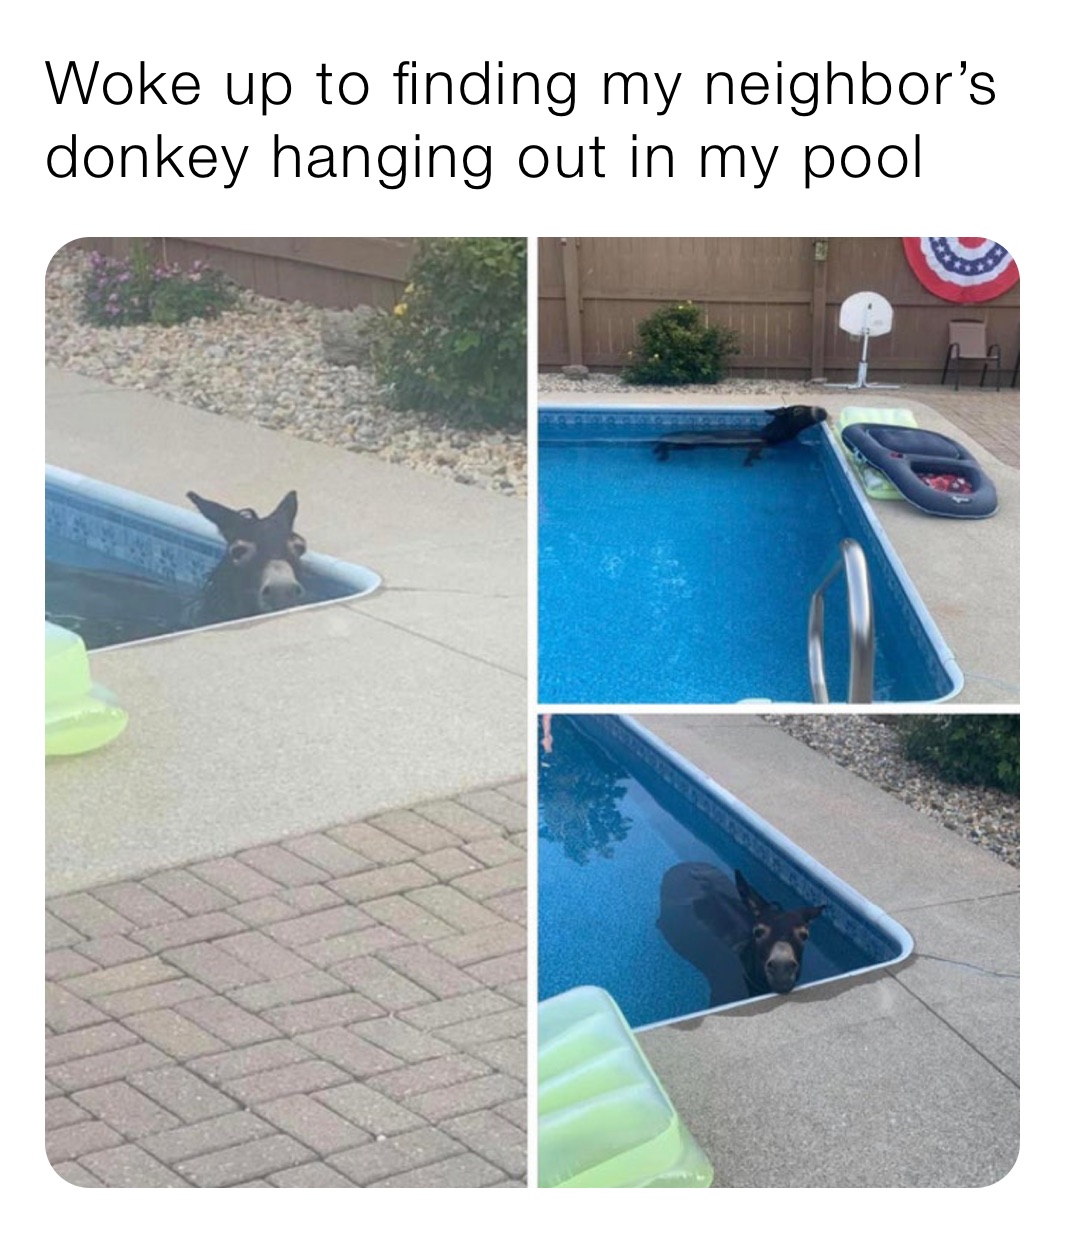 Woke up to finding my neighbor’s donkey hanging out in my pool